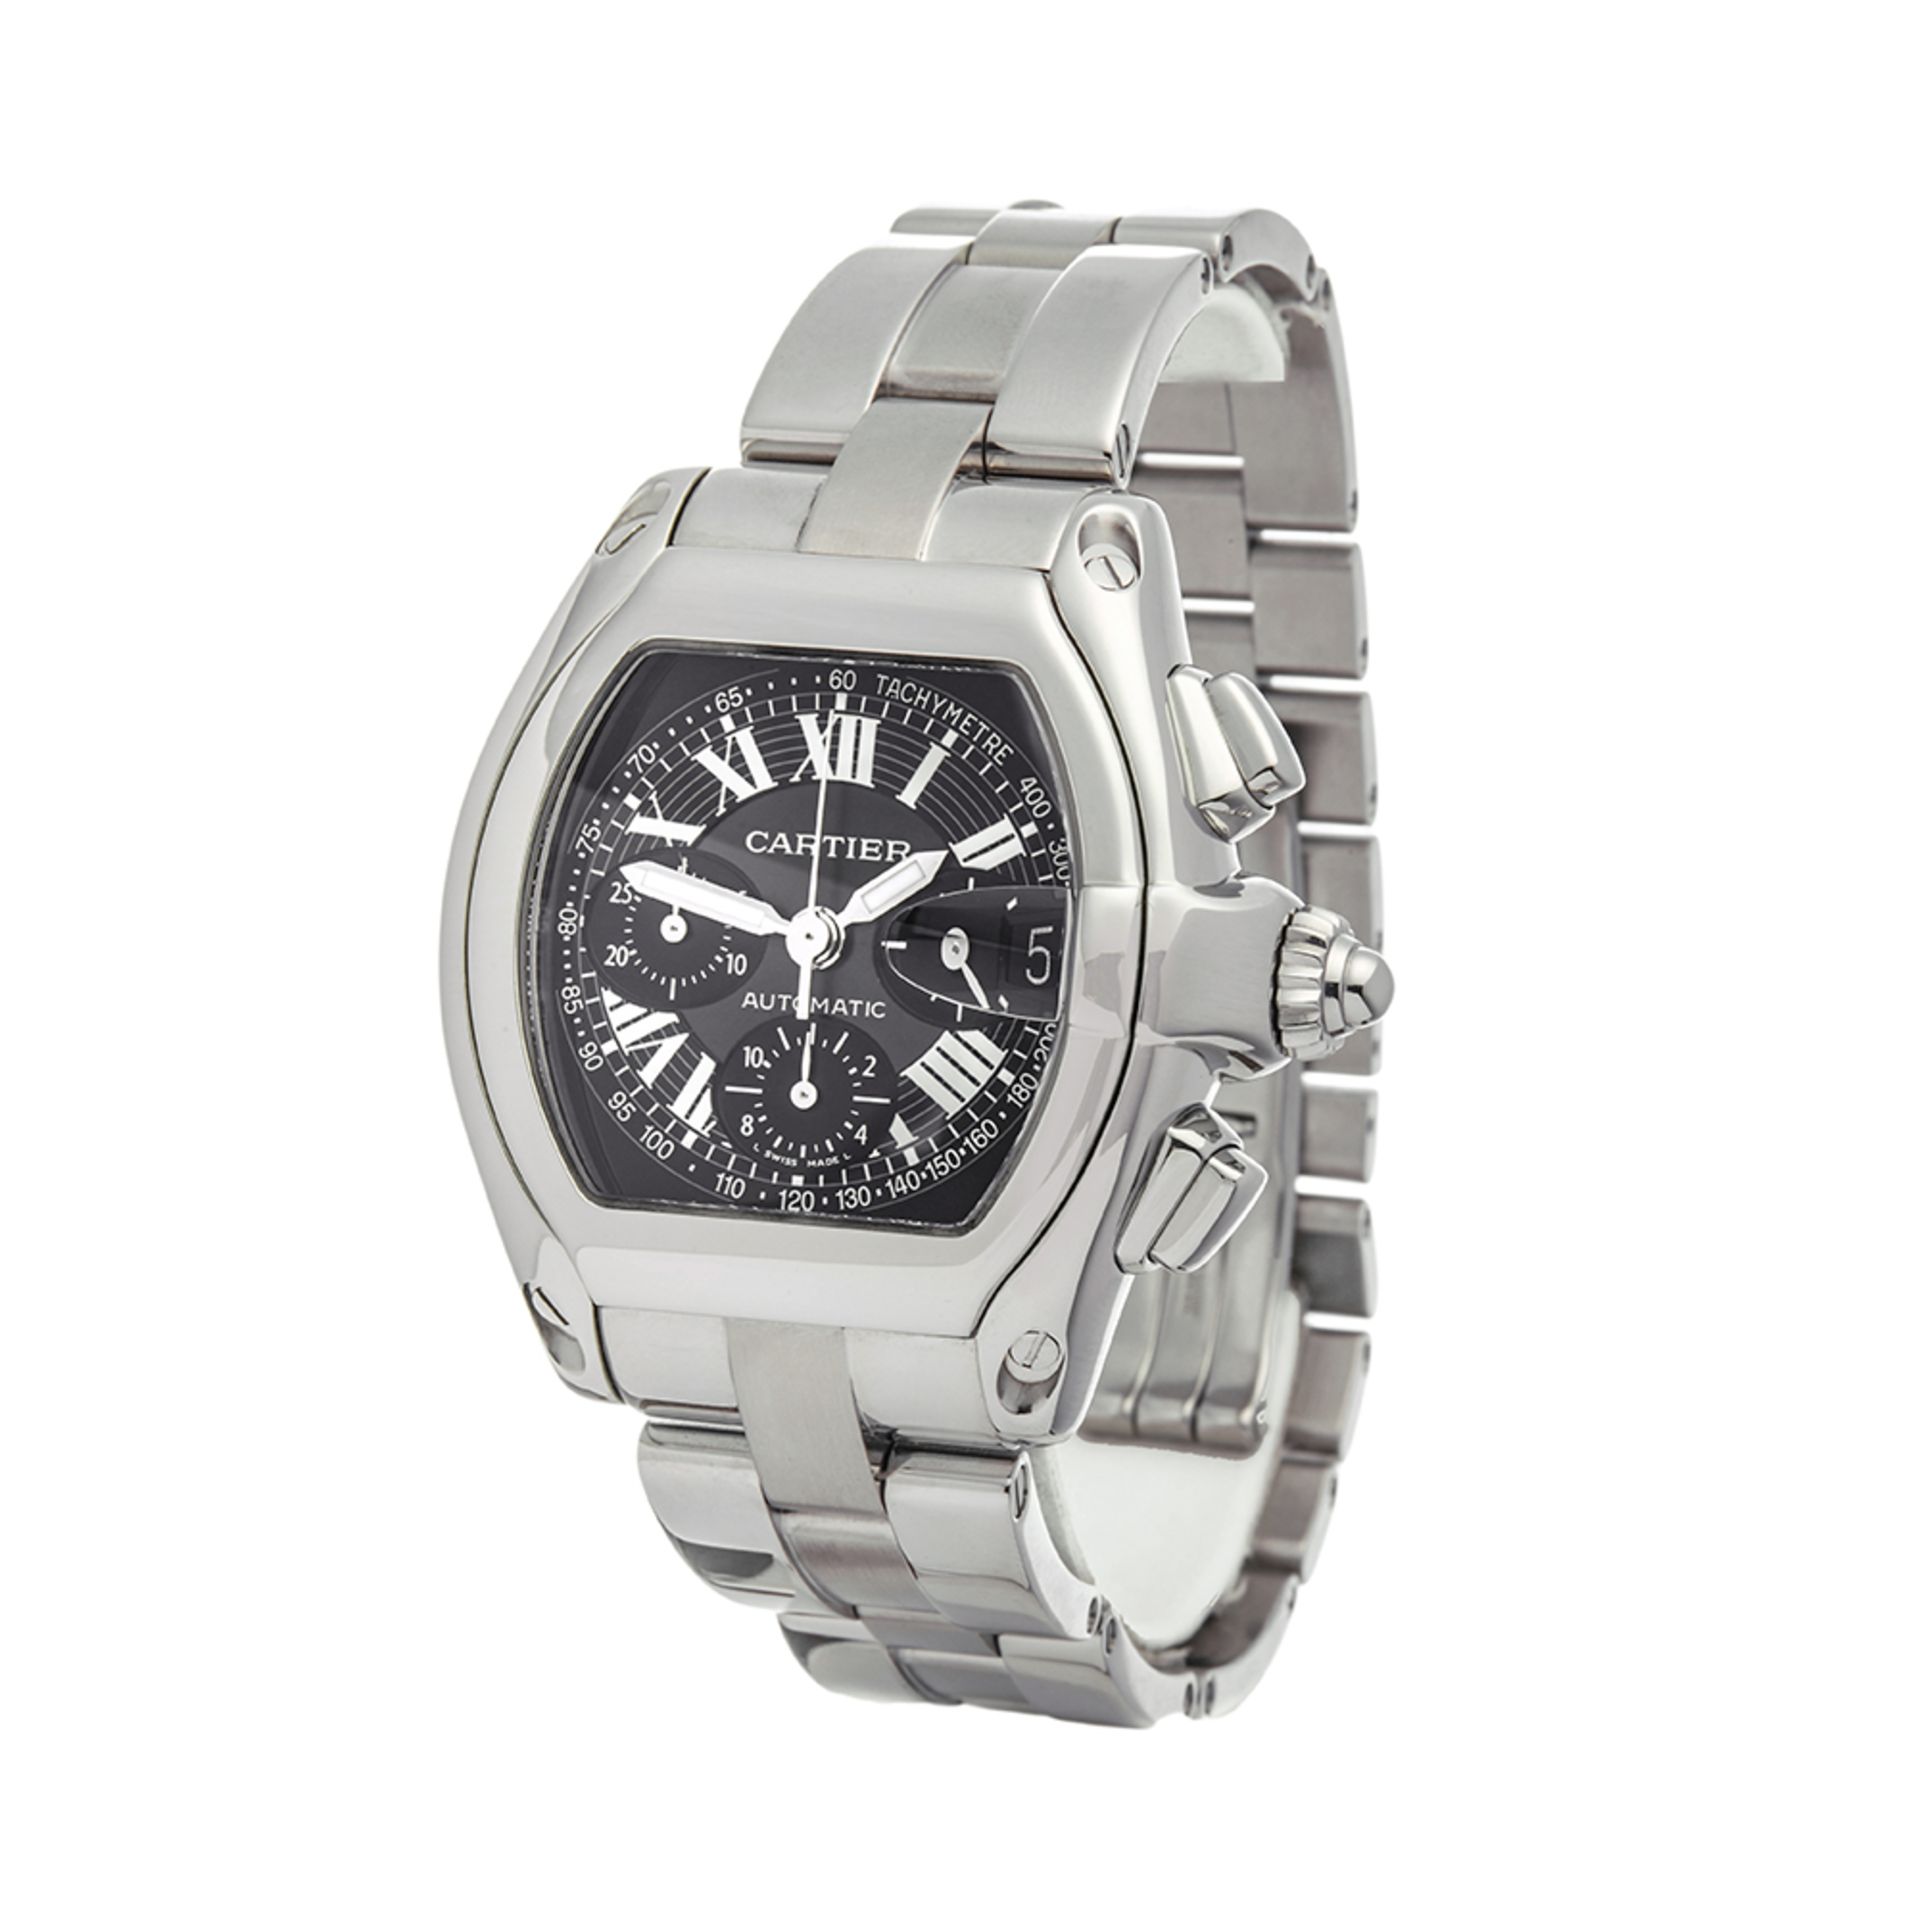 Cartier Roadster XL Chronograph Stainless Steel - 2618 or W62007X6 - Image 3 of 8